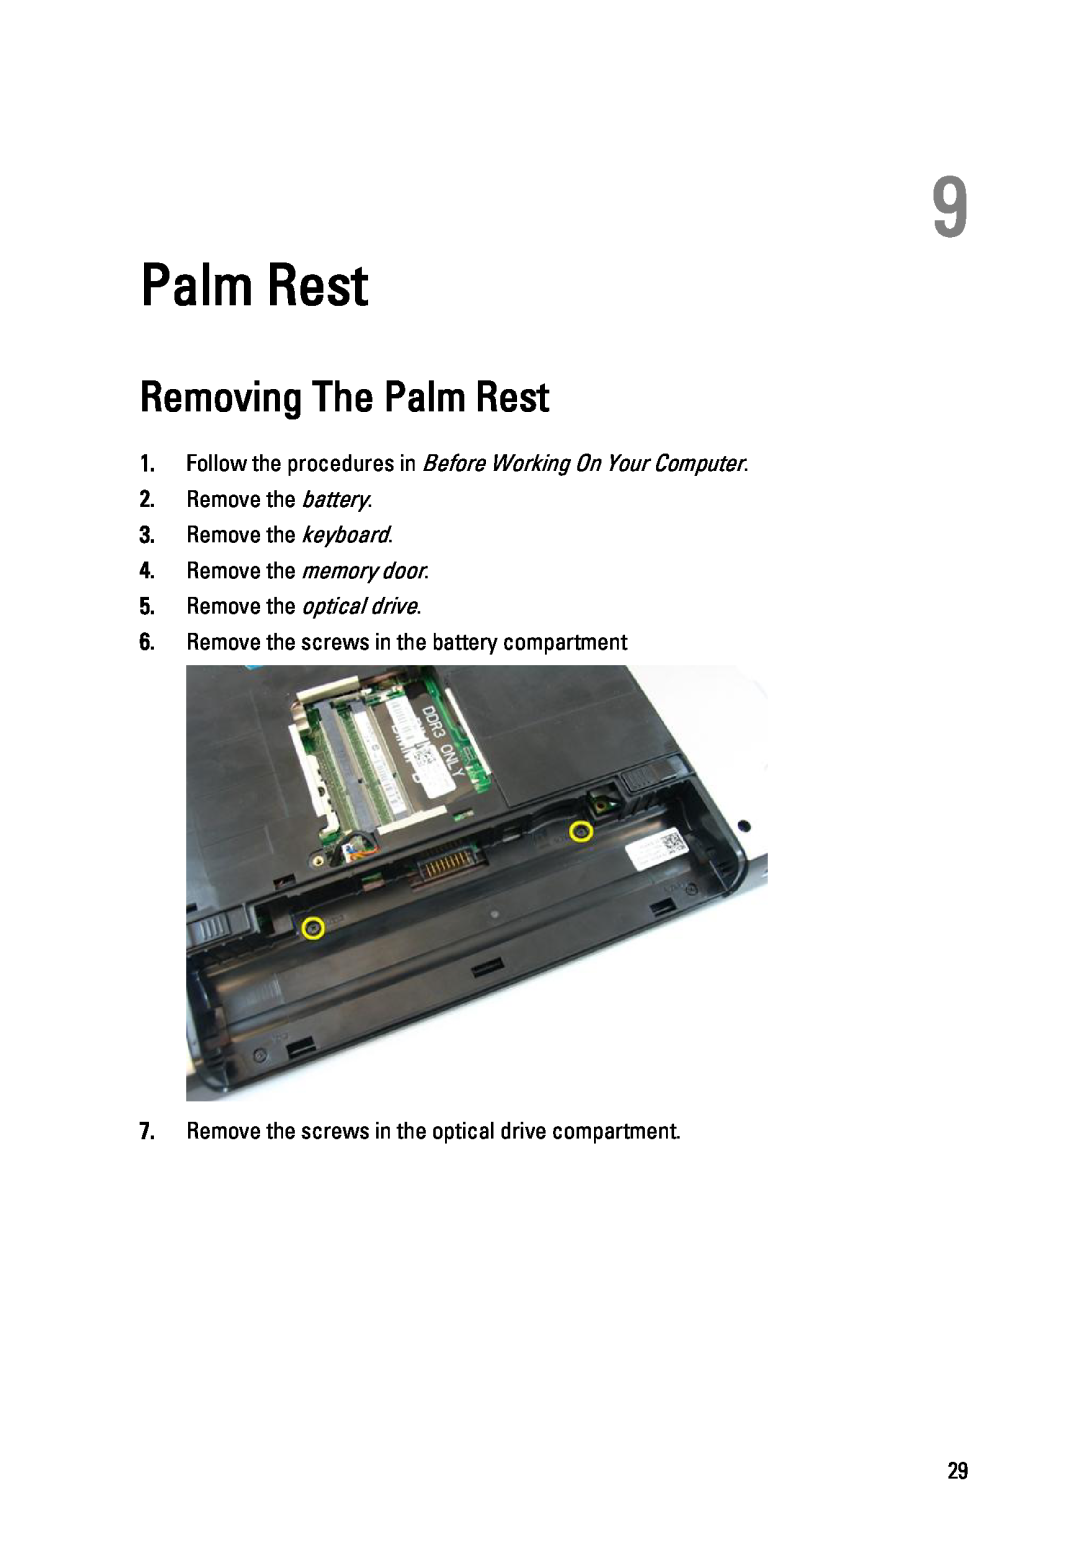 Dell 3450 owner manual Removing The Palm Rest, Remove the battery 3. Remove the keyboard, Remove the memory door 